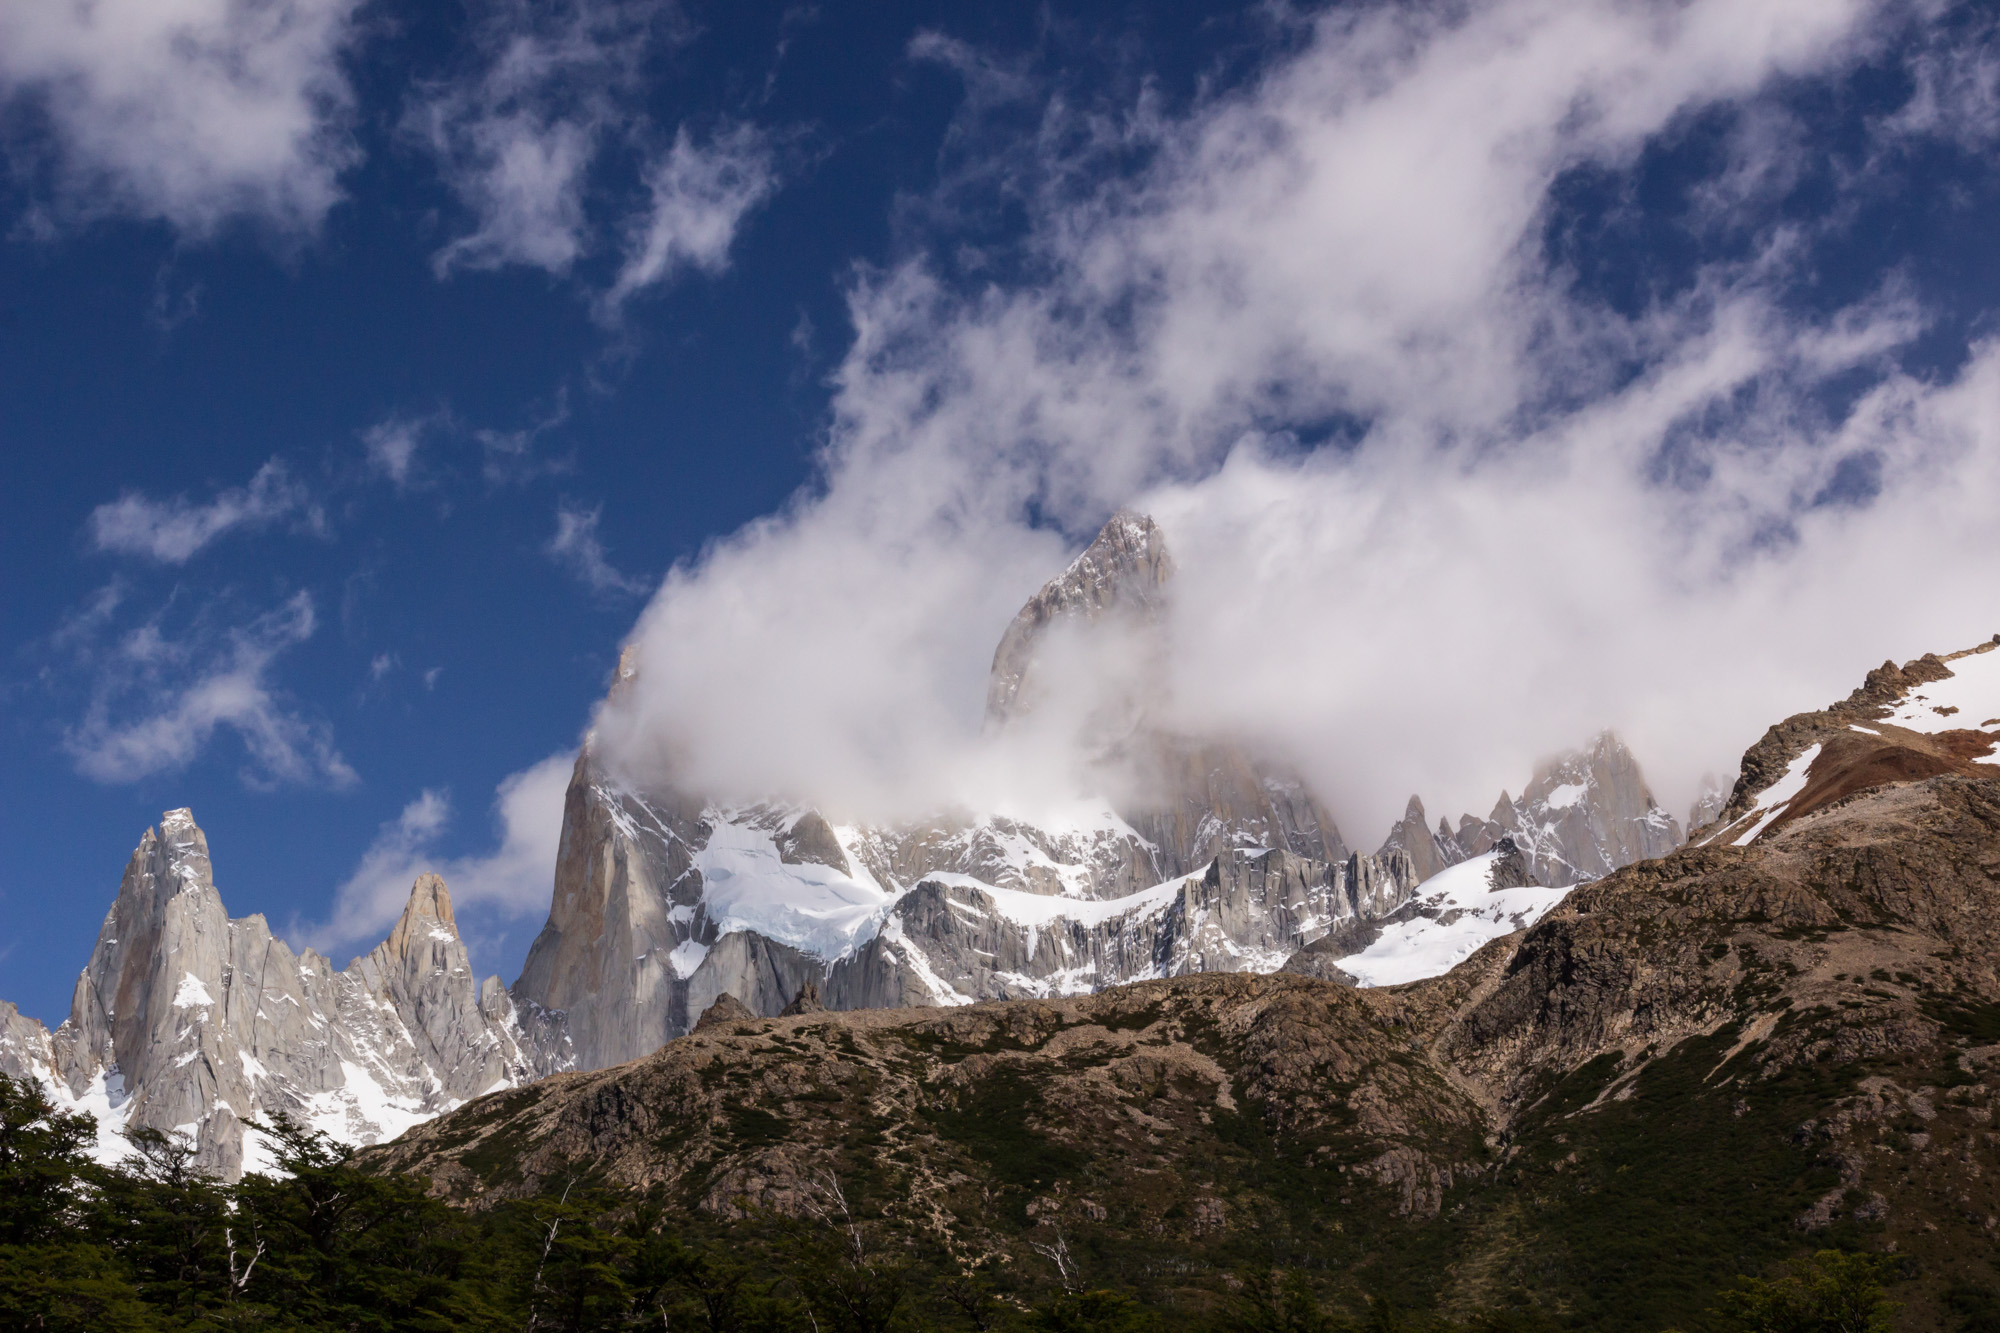 Sheer magnificence - the castellated towers and spires of the Fitzroy chain emerge from the wind-whipped clouds 